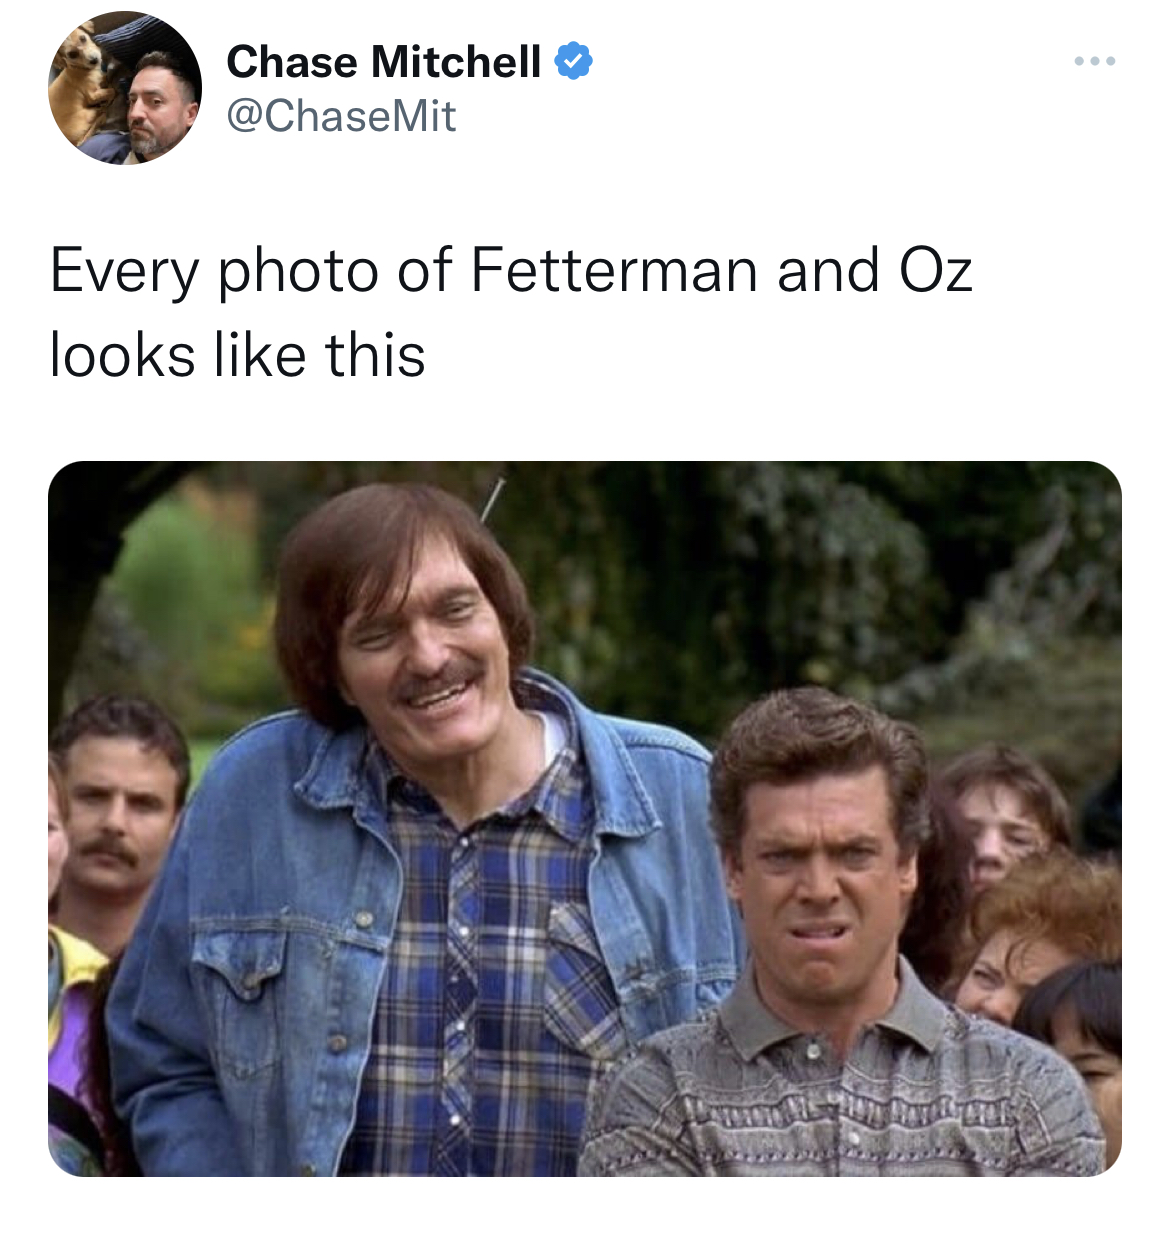 Tweets roasting celebs - happy gilmore accomplished that feat - Chase Mitchell Every photo of Fetterman and Oz looks this Vanwm. Mezing fat ant